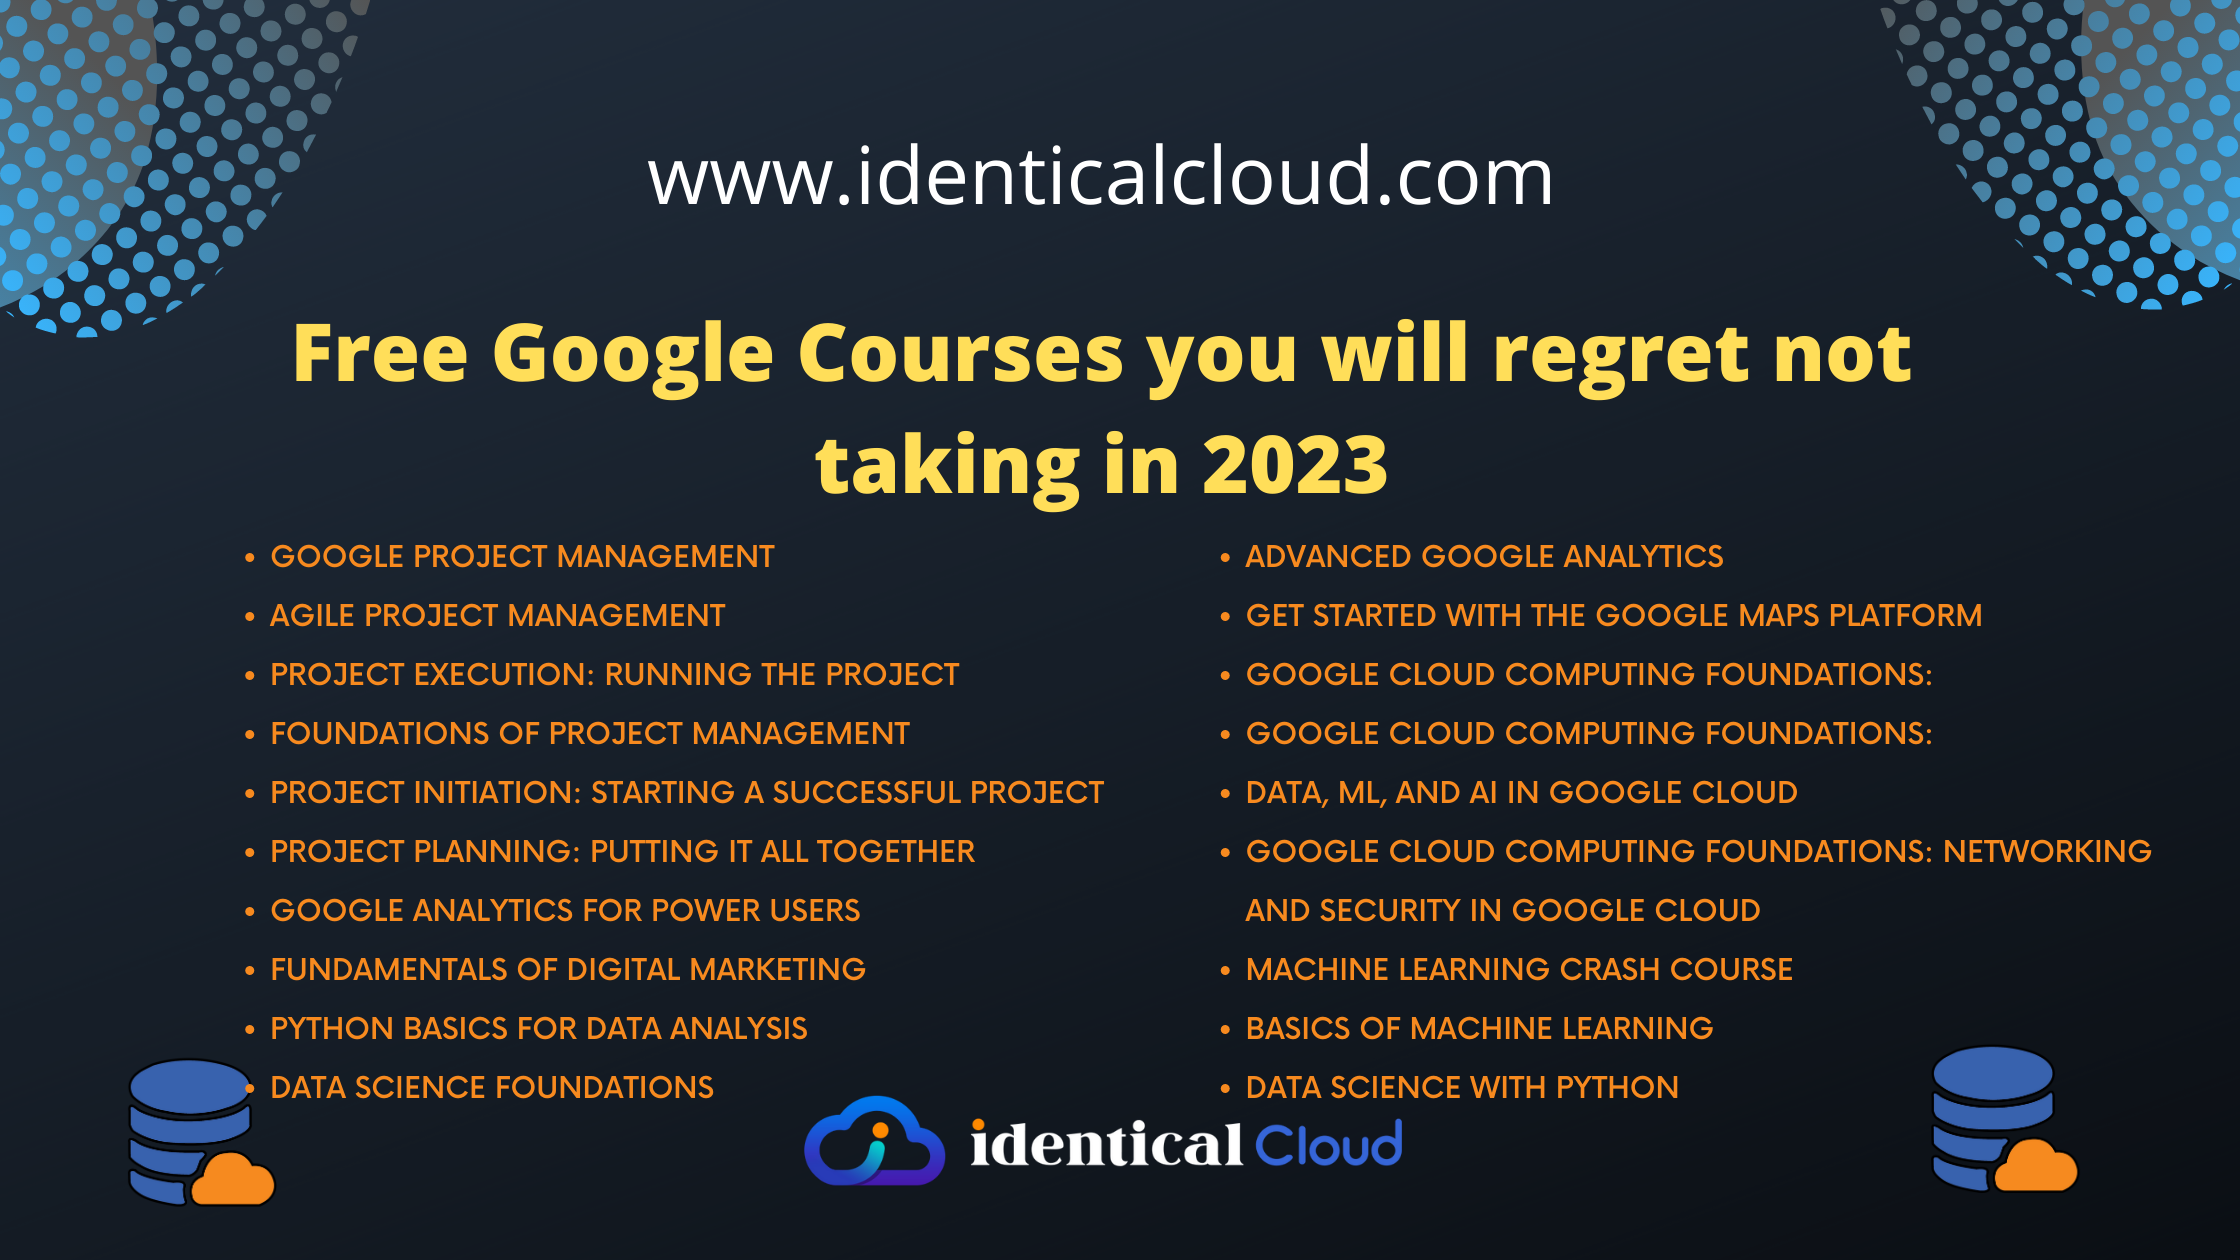 Free Google Courses you will regret not taking in 2023 identical Cloud